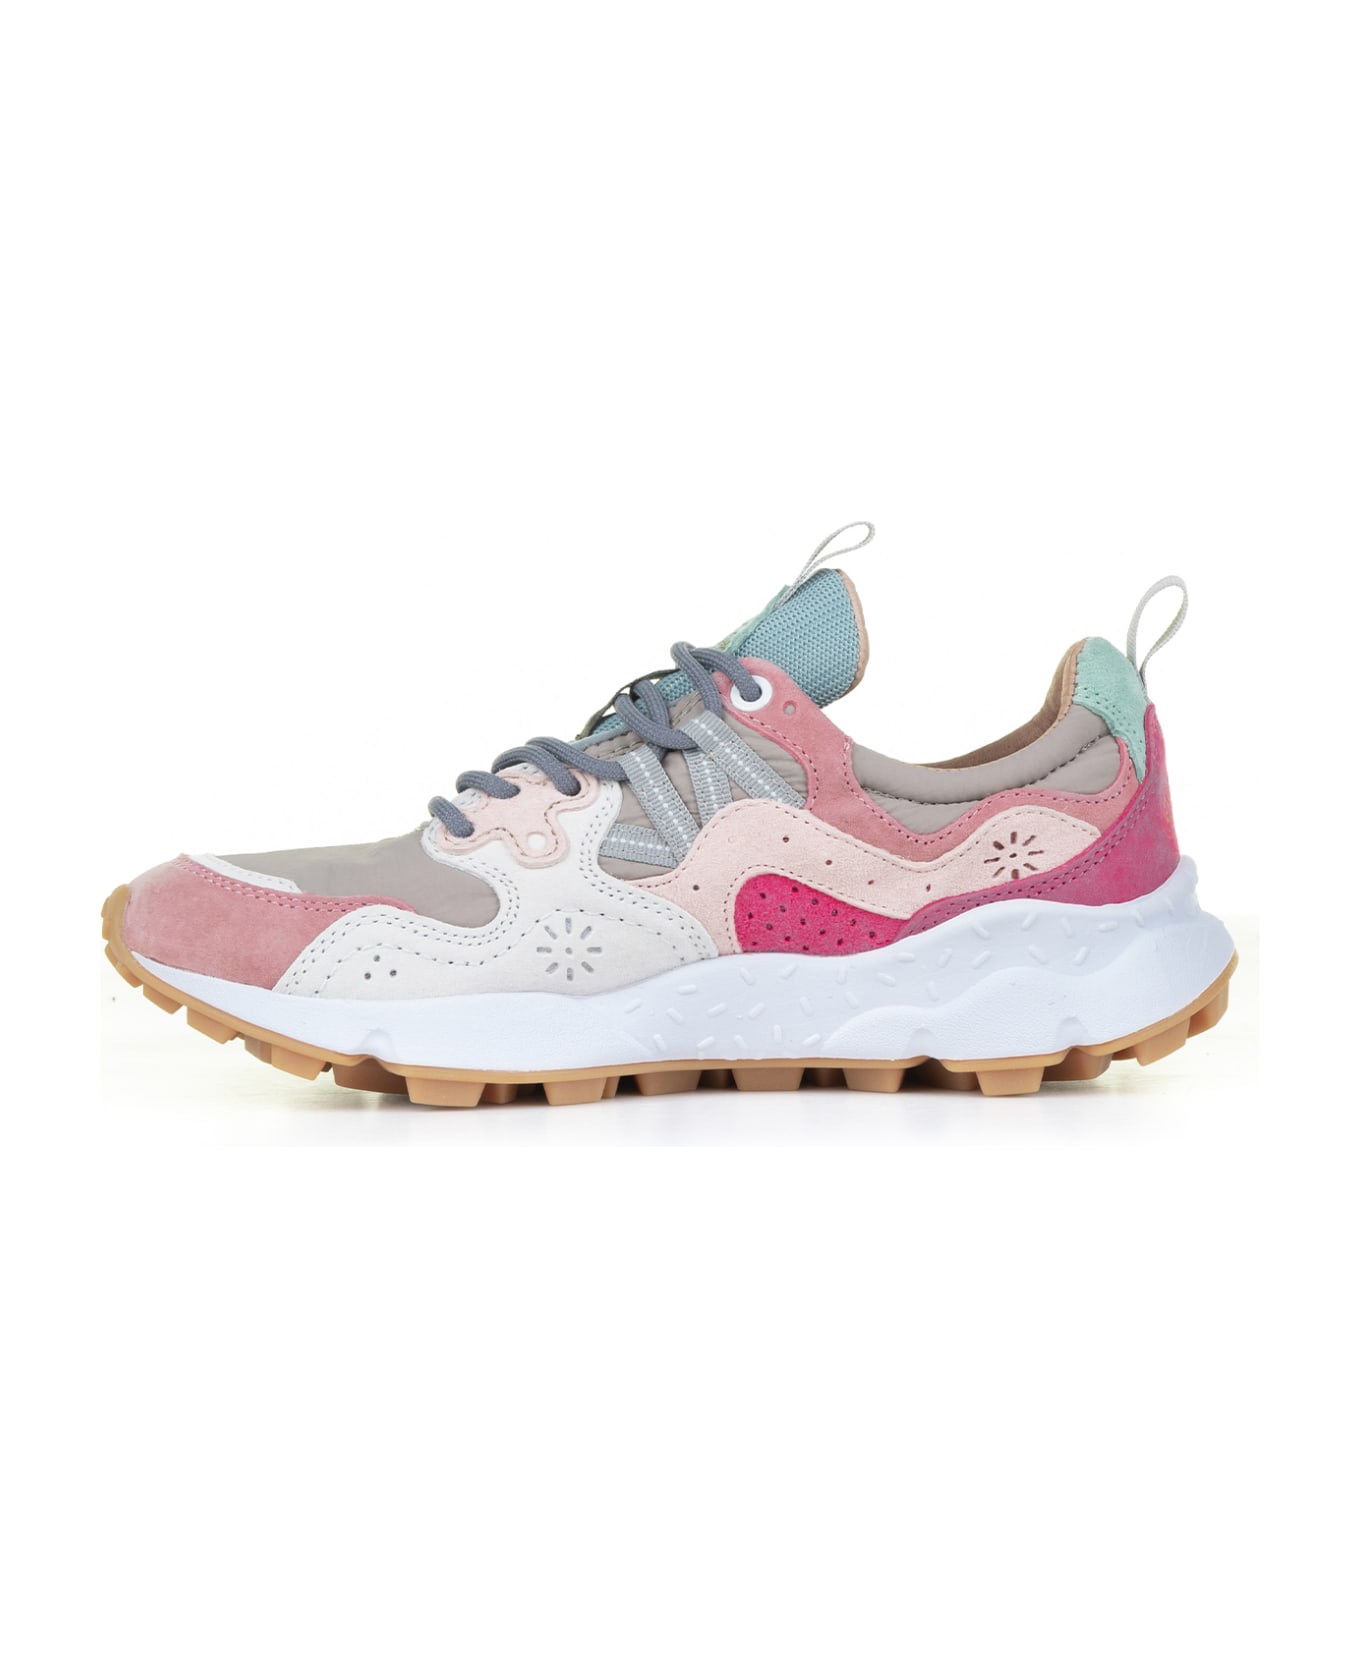 Flower Mountain Yamano Pink Suede And Nylon Sneakers - CIPRIA MULTI